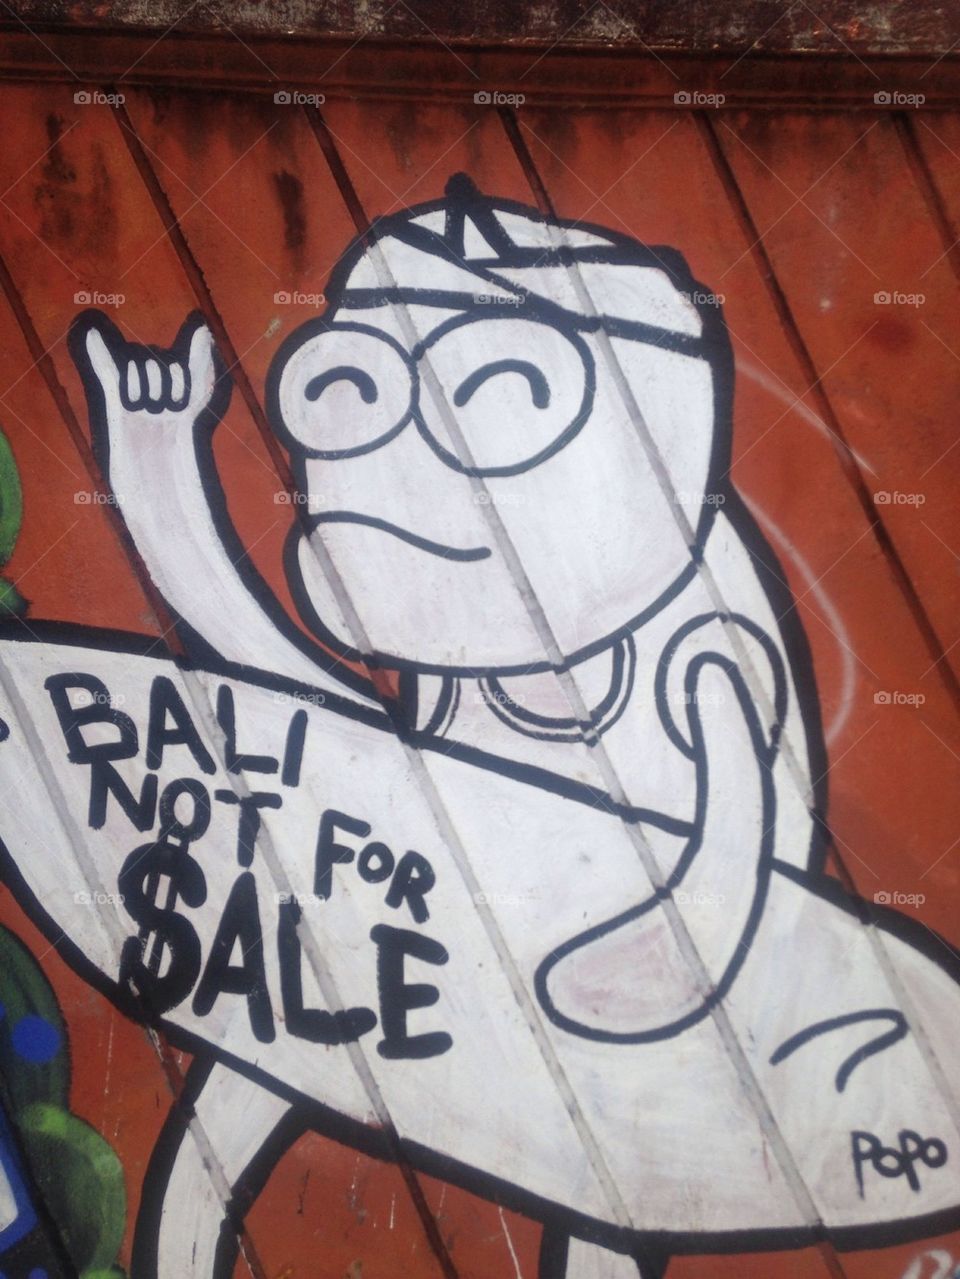 Bali not for sale